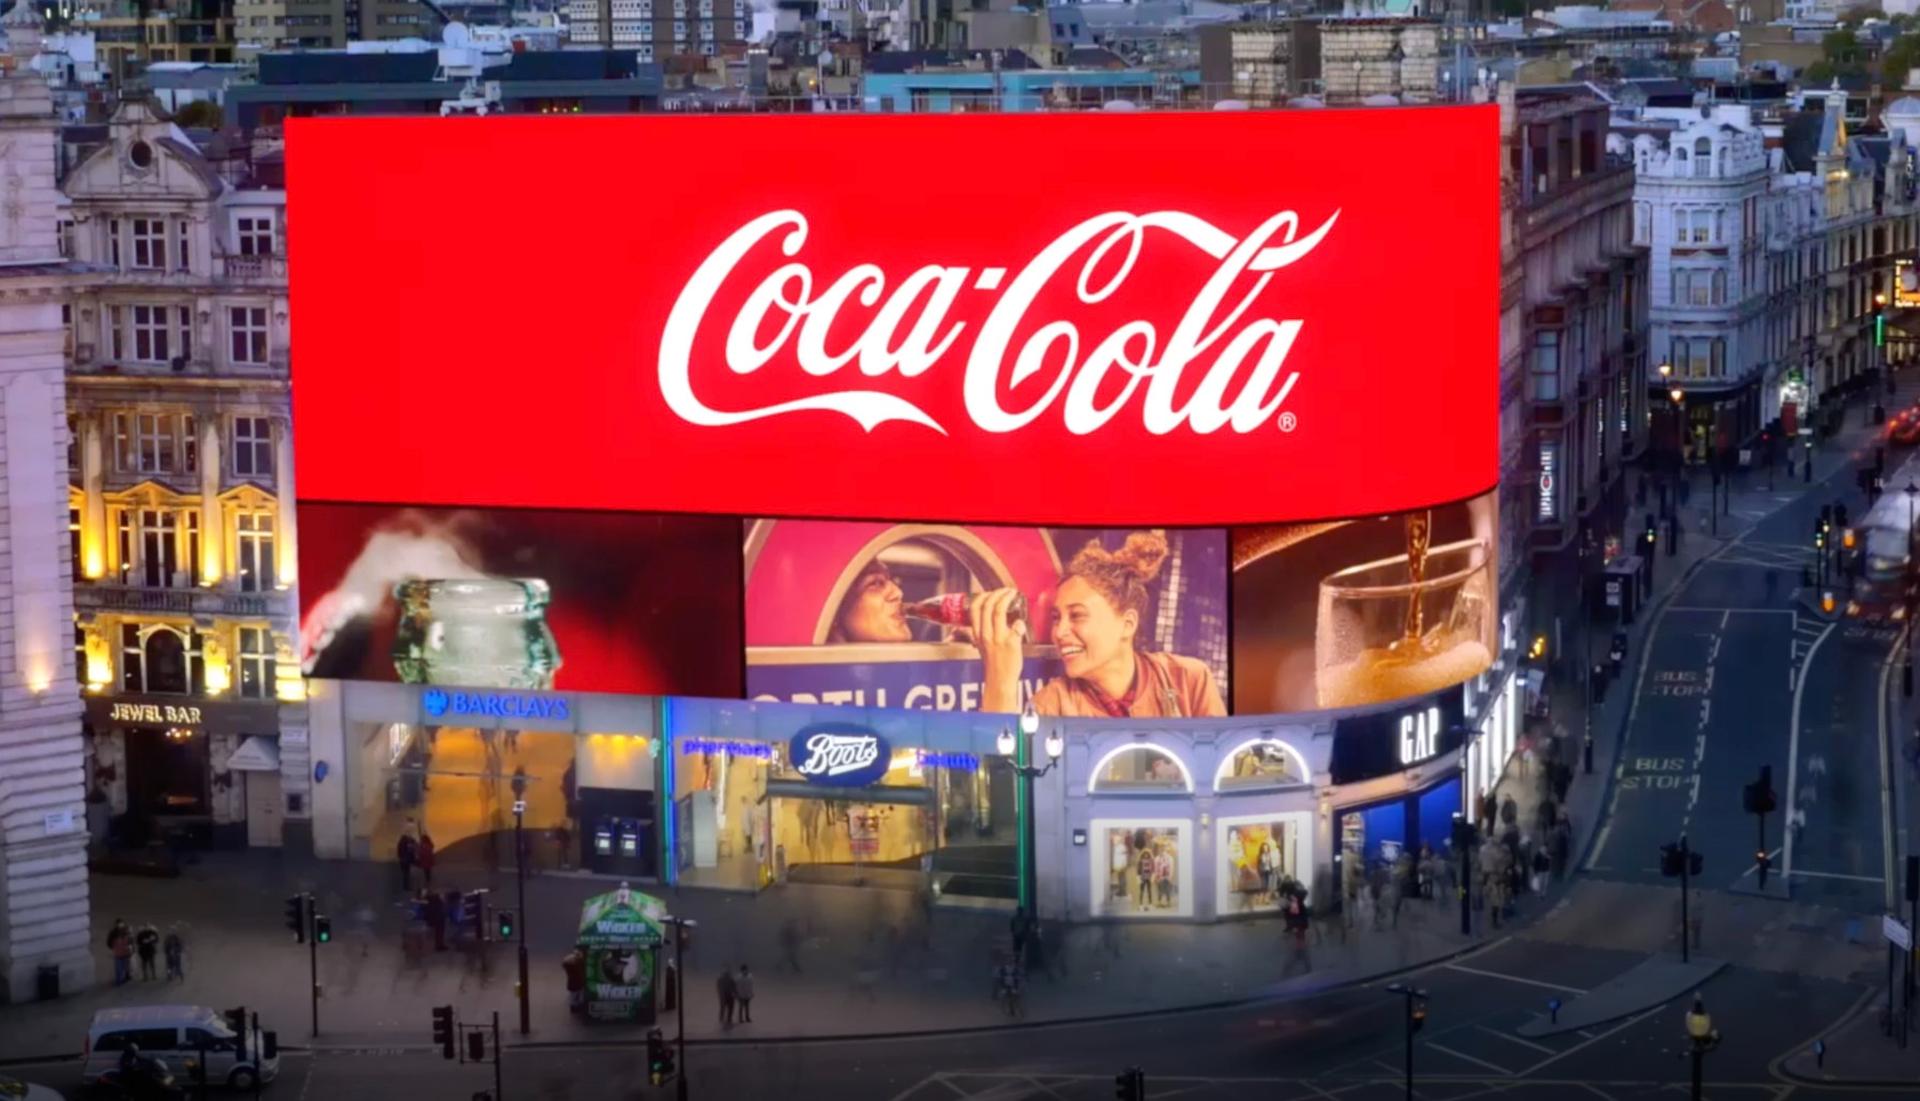 Outdoor advertising firm considers putting “undervalued” company up for sale